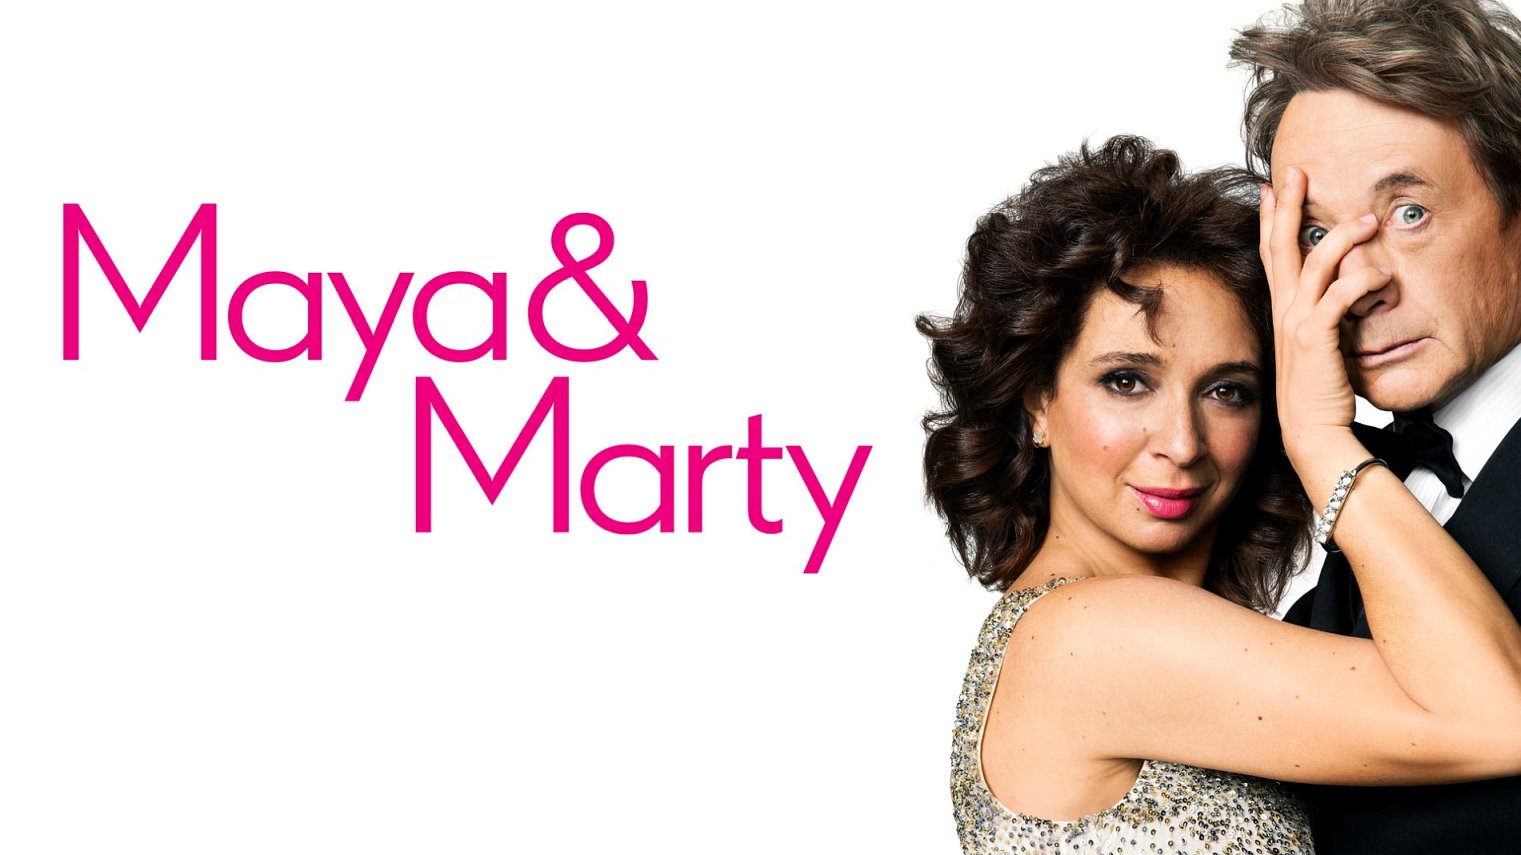 what time is Maya & Marty on